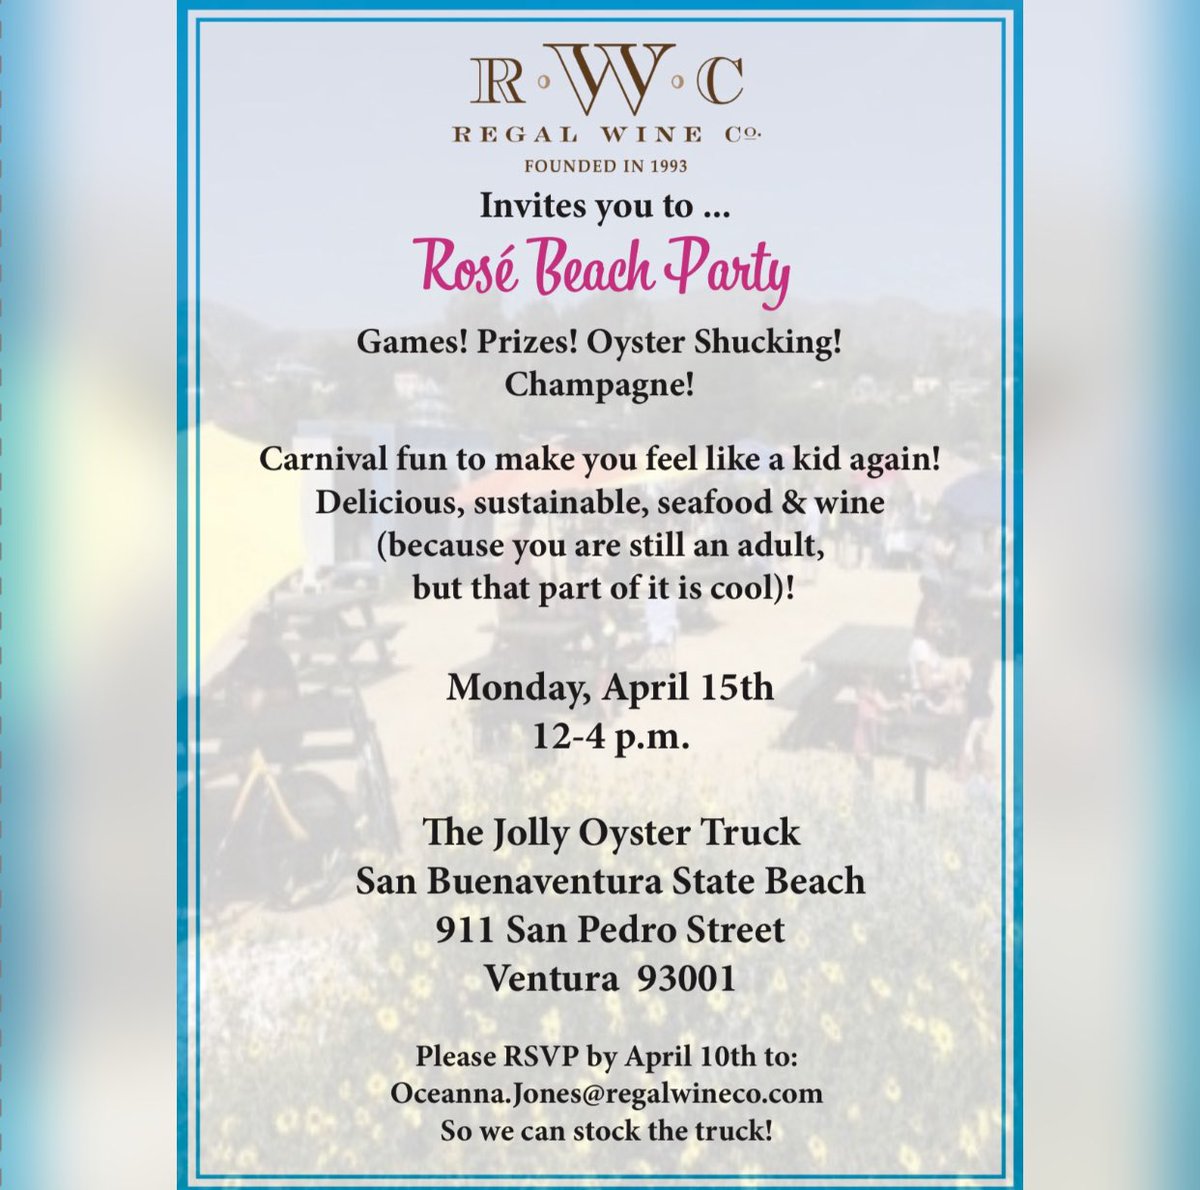 Come join RWC at this years Rosé Beach Party! 🍷🏝🌞🌷 Includes: games, prizes, oysters shucking, and champagne! 🍾 

👉Monday, April 15th from 12-4pm @ The Jolly Oyster Truck in San Buenaventura State Beach!👈 

✨RSVP to Oceanna.Jones@regalwineco.com by April 10th! ✨